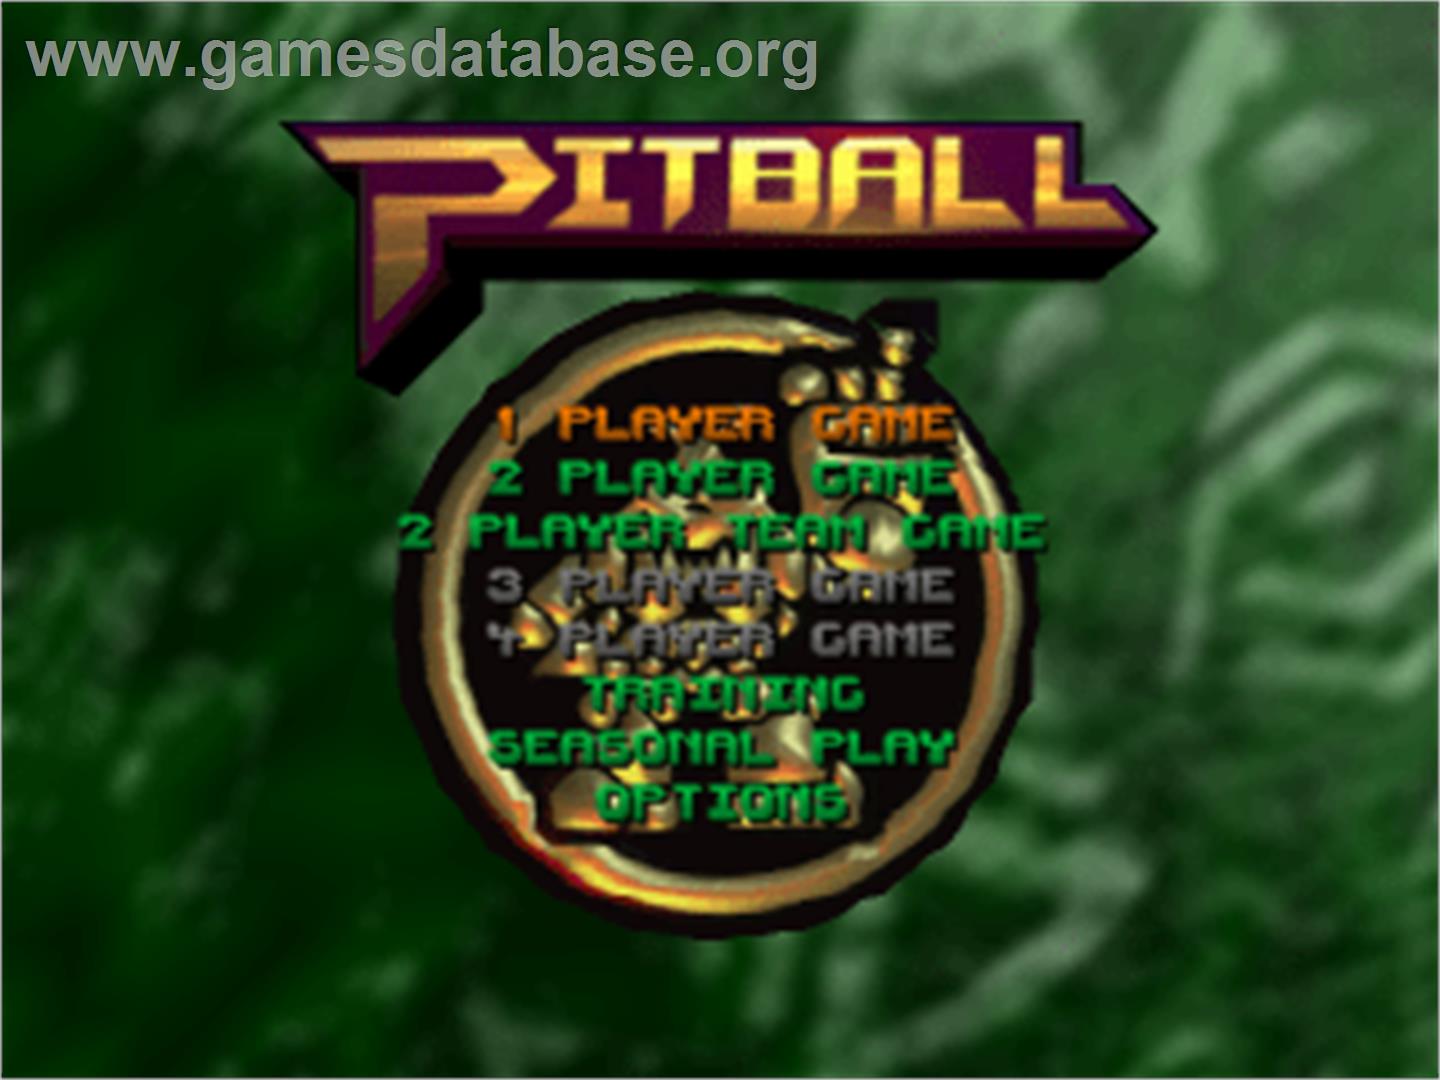 Pitball - Sony Playstation - Artwork - Title Screen